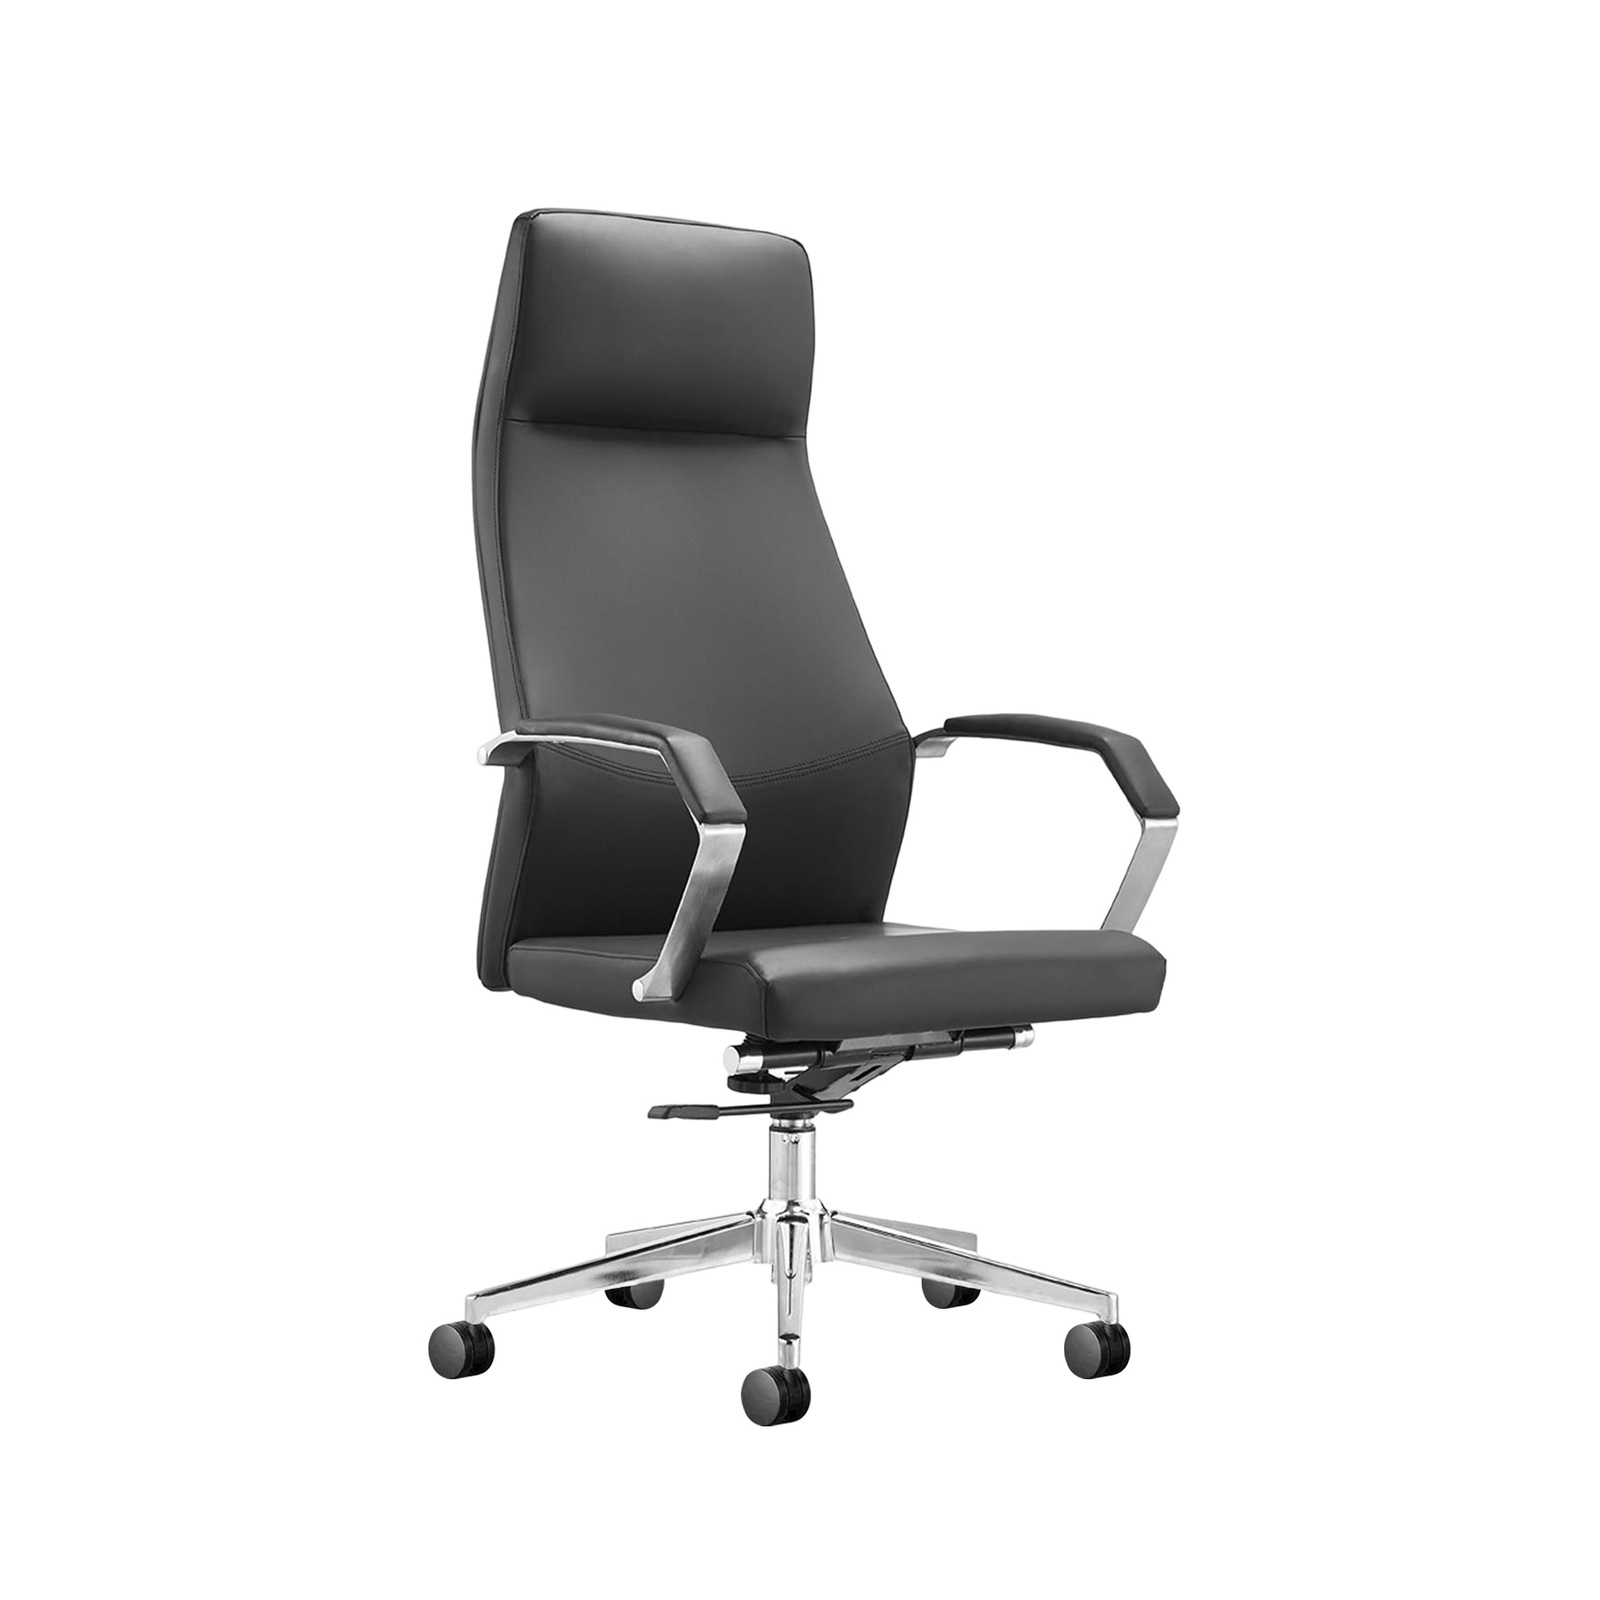 Office Chair Premium PU Leather High Back Executive Work Computer Seat